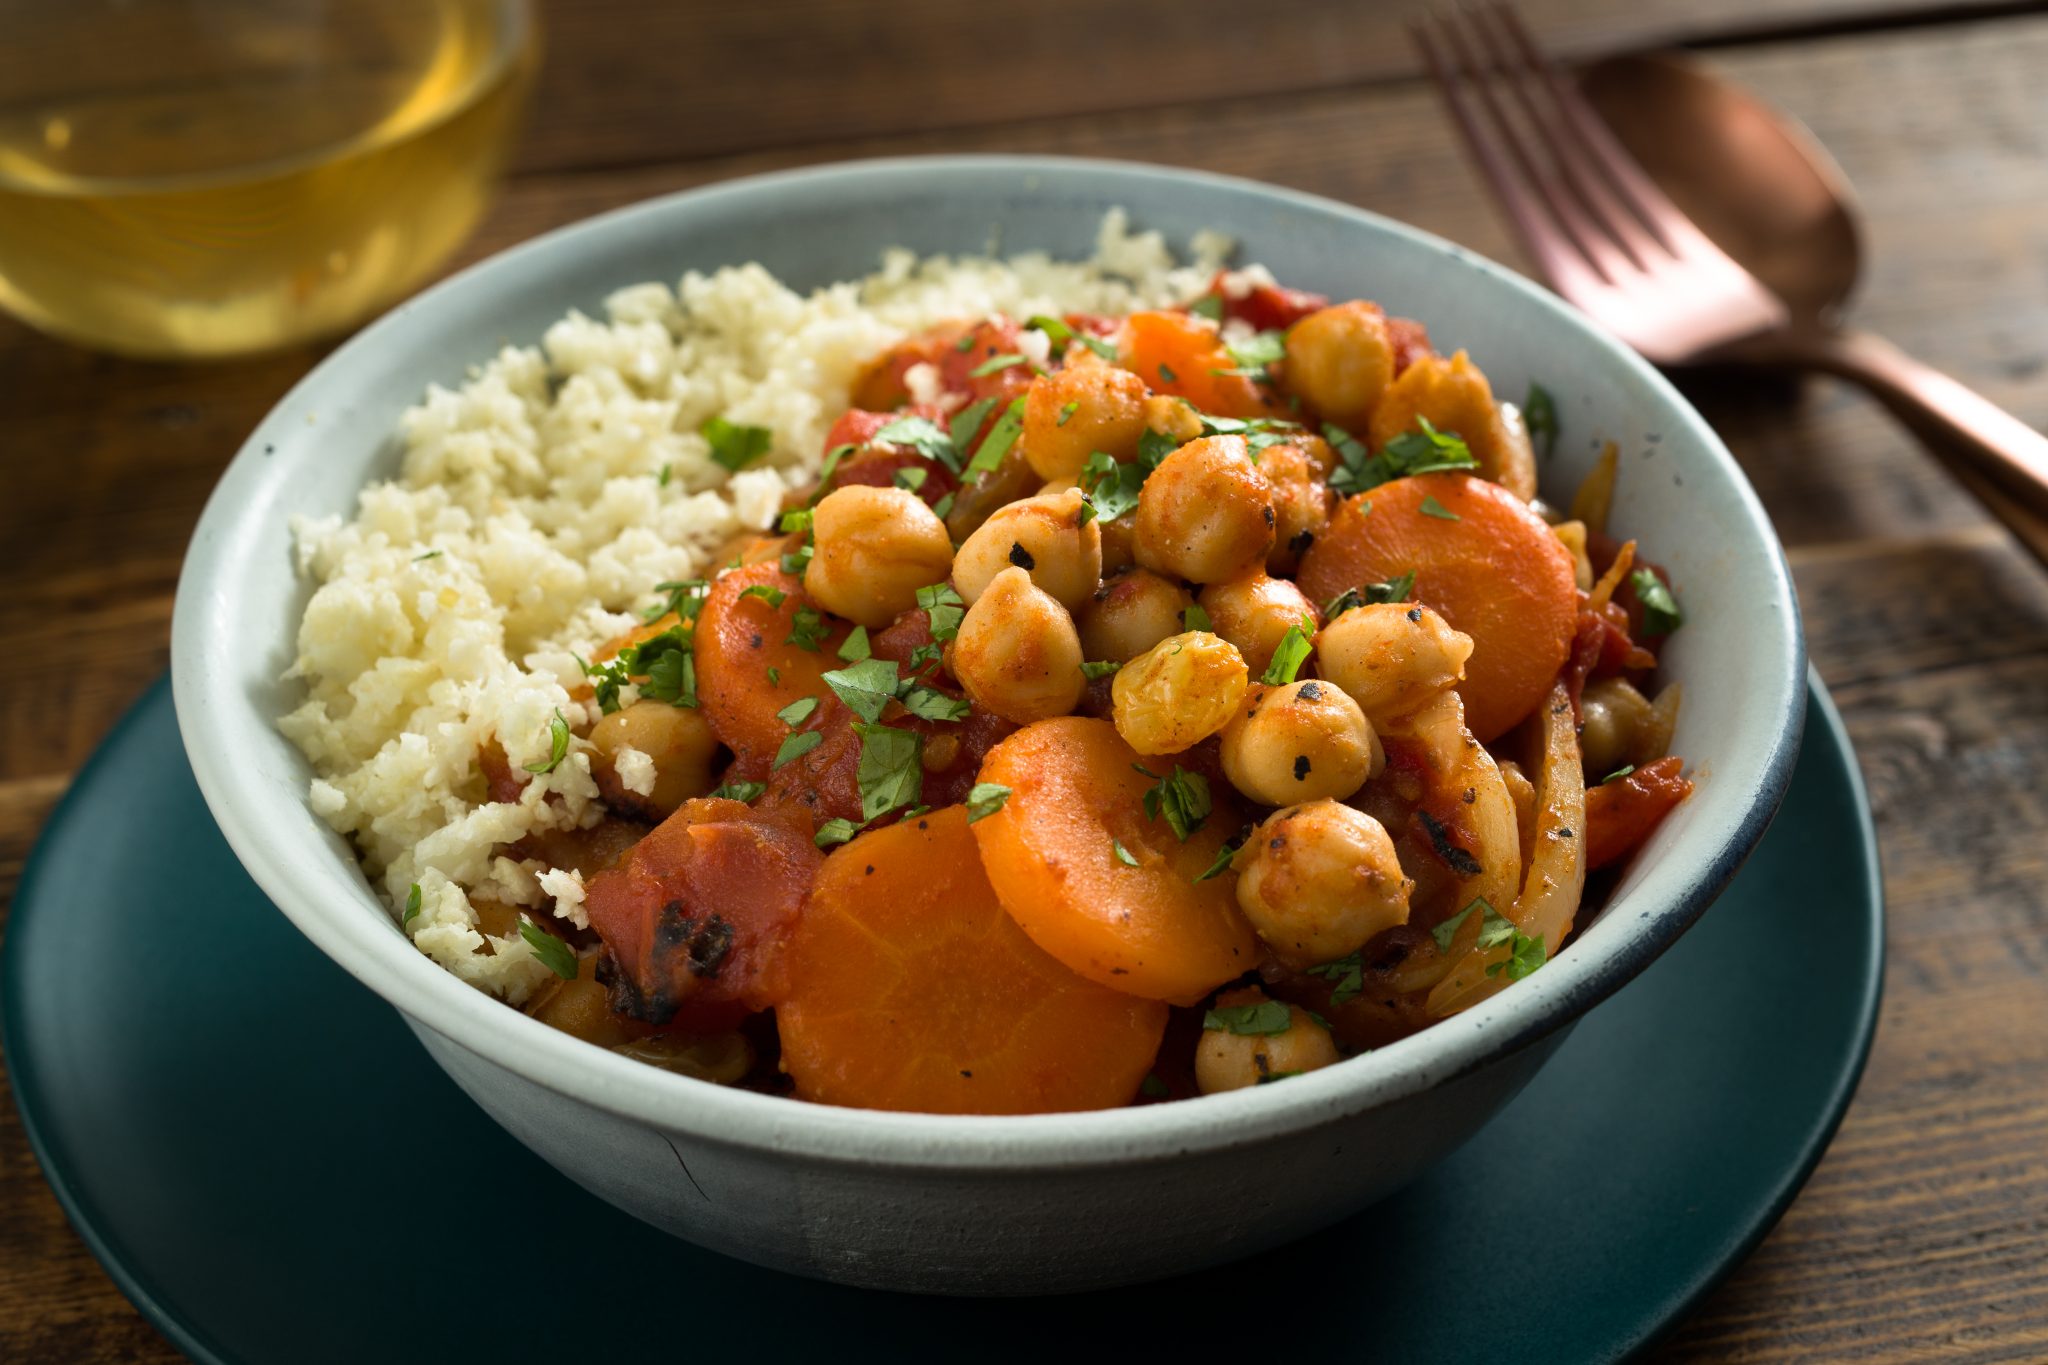 Moroccan-Style Chickpea Stew with Cauliflower Rice | Cans Get You Cooking